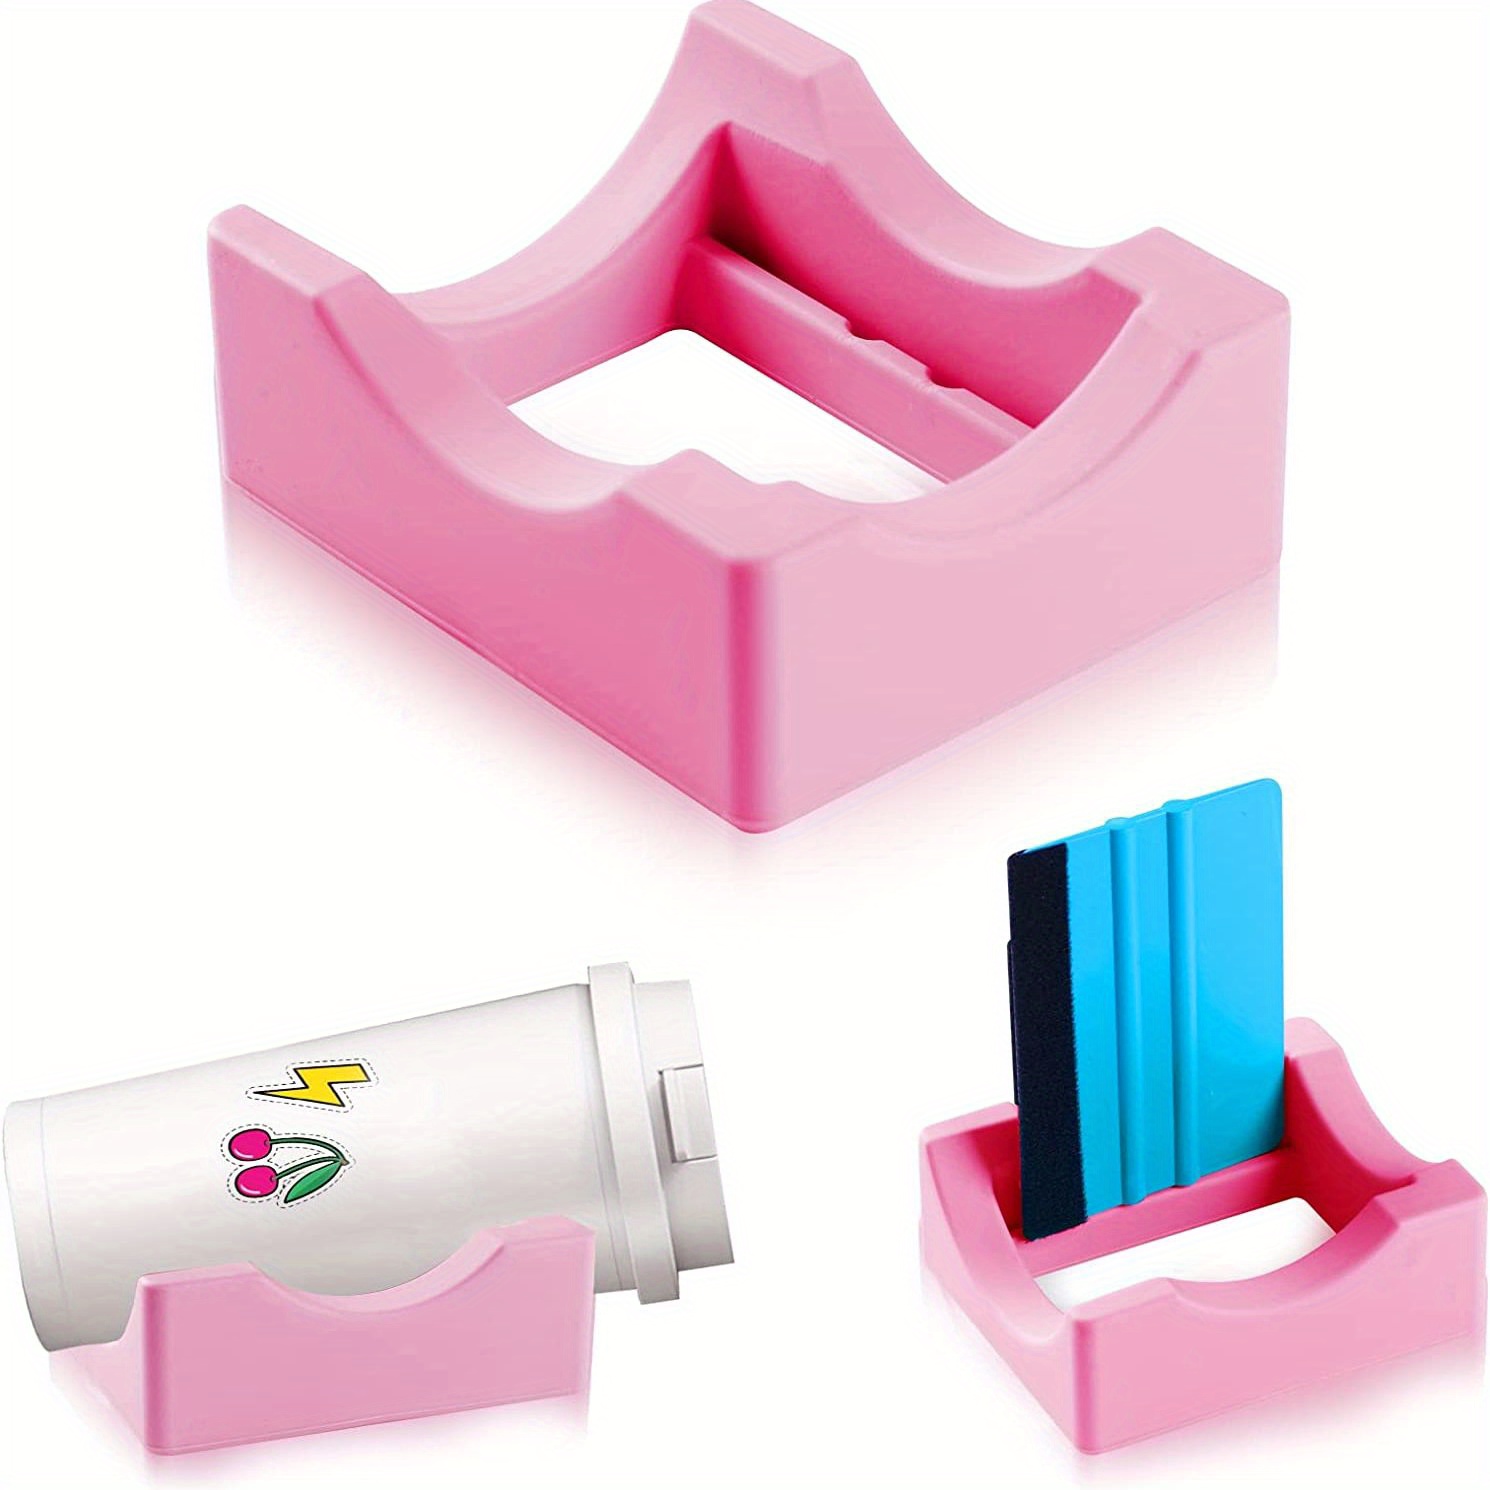 Tumbler Cradle Holder for Crafts, Silicone Non-slip Cup Holder for Wrapping  Vinyl 